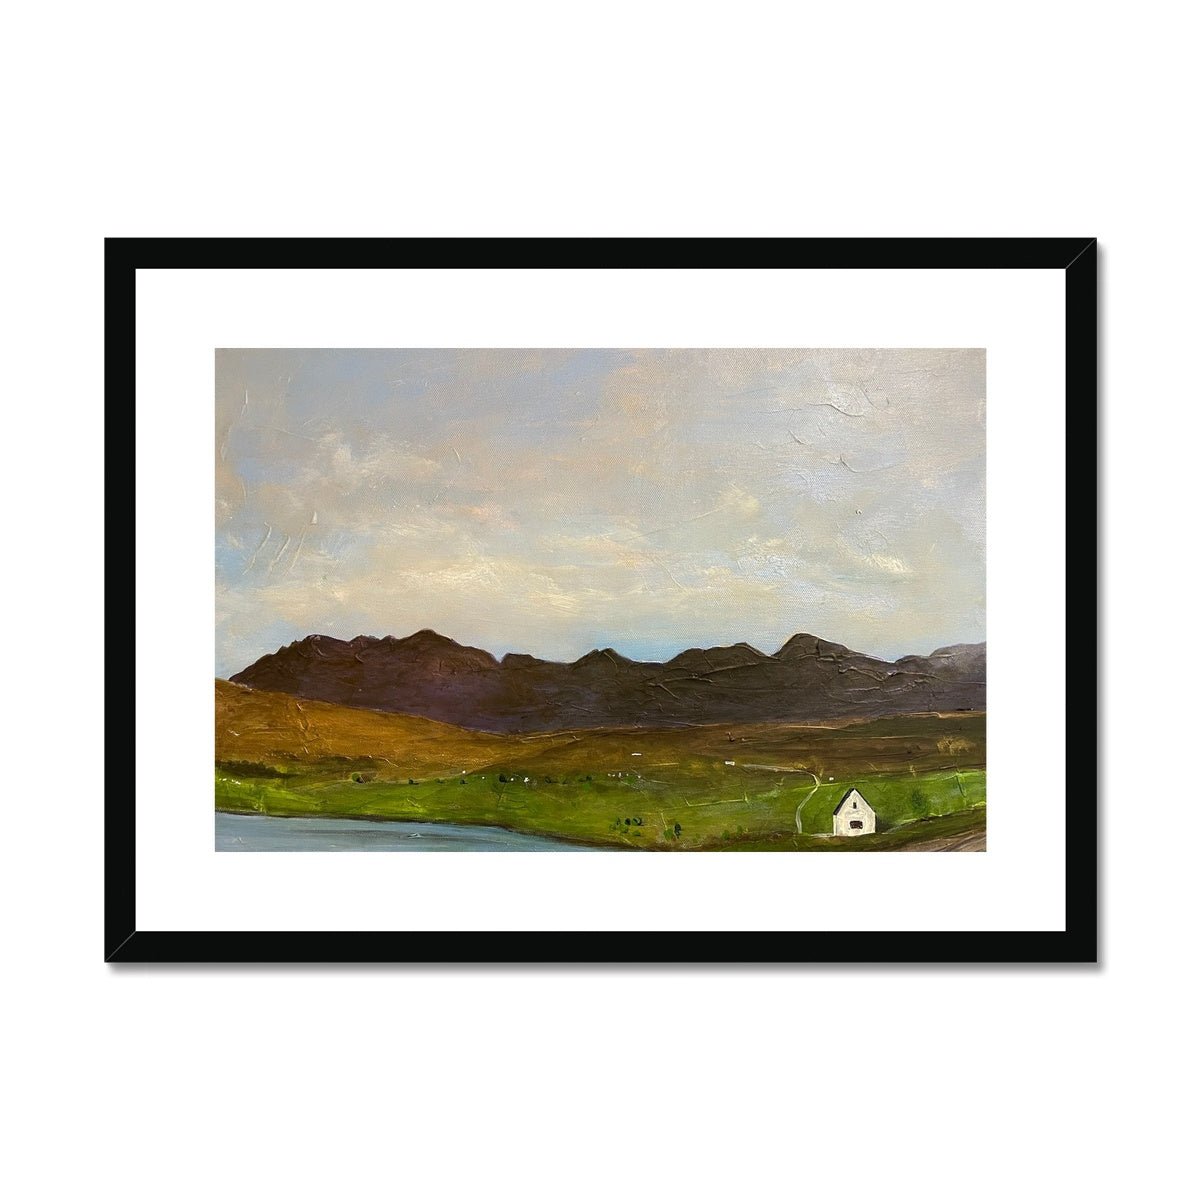 The Road To Carbost Skye Painting | Framed & Mounted Prints From Scotland-Framed & Mounted Prints-Skye Art Gallery-A2 Landscape-Black Frame-Paintings, Prints, Homeware, Art Gifts From Scotland By Scottish Artist Kevin Hunter